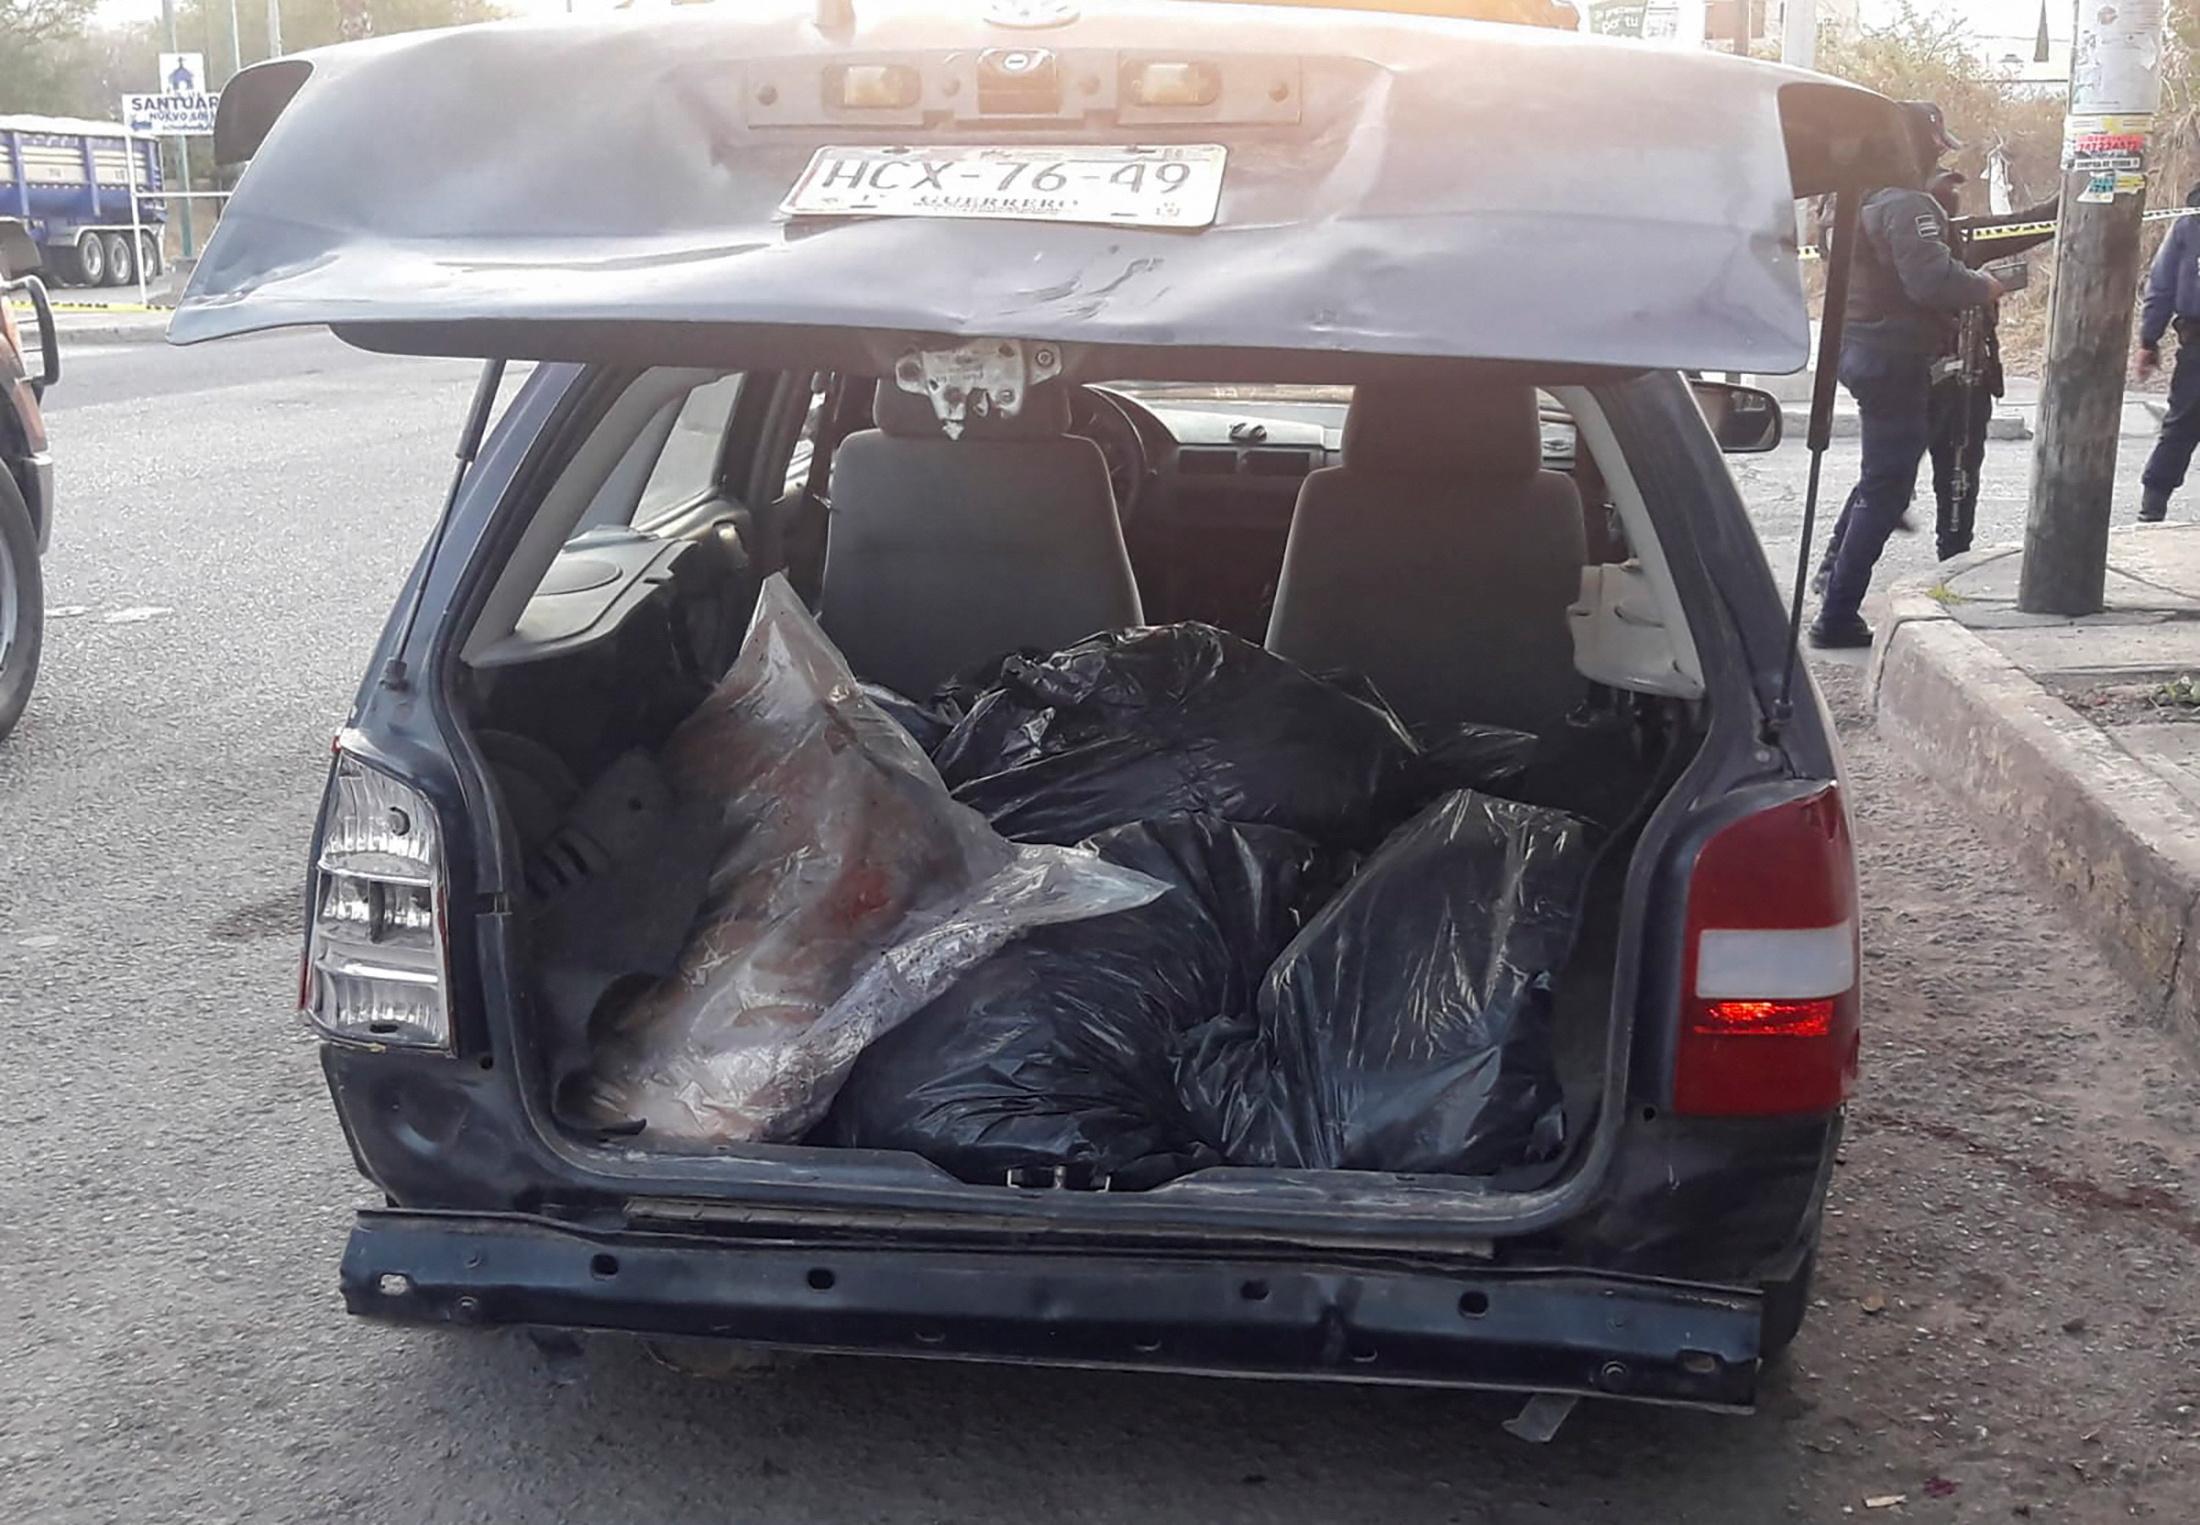  SENSITIVE MATERIAL. THIS IMAGE MAY OFFEND OR DISTURB    Bags containing human remains are stacked inside a car after the severed heads of six men were discovered atop the car, as police secures the crime scene, in Chilapa, Mexico March 31, 2022. REUTERS/Stringer NO RESALES. NO ARCHIVES